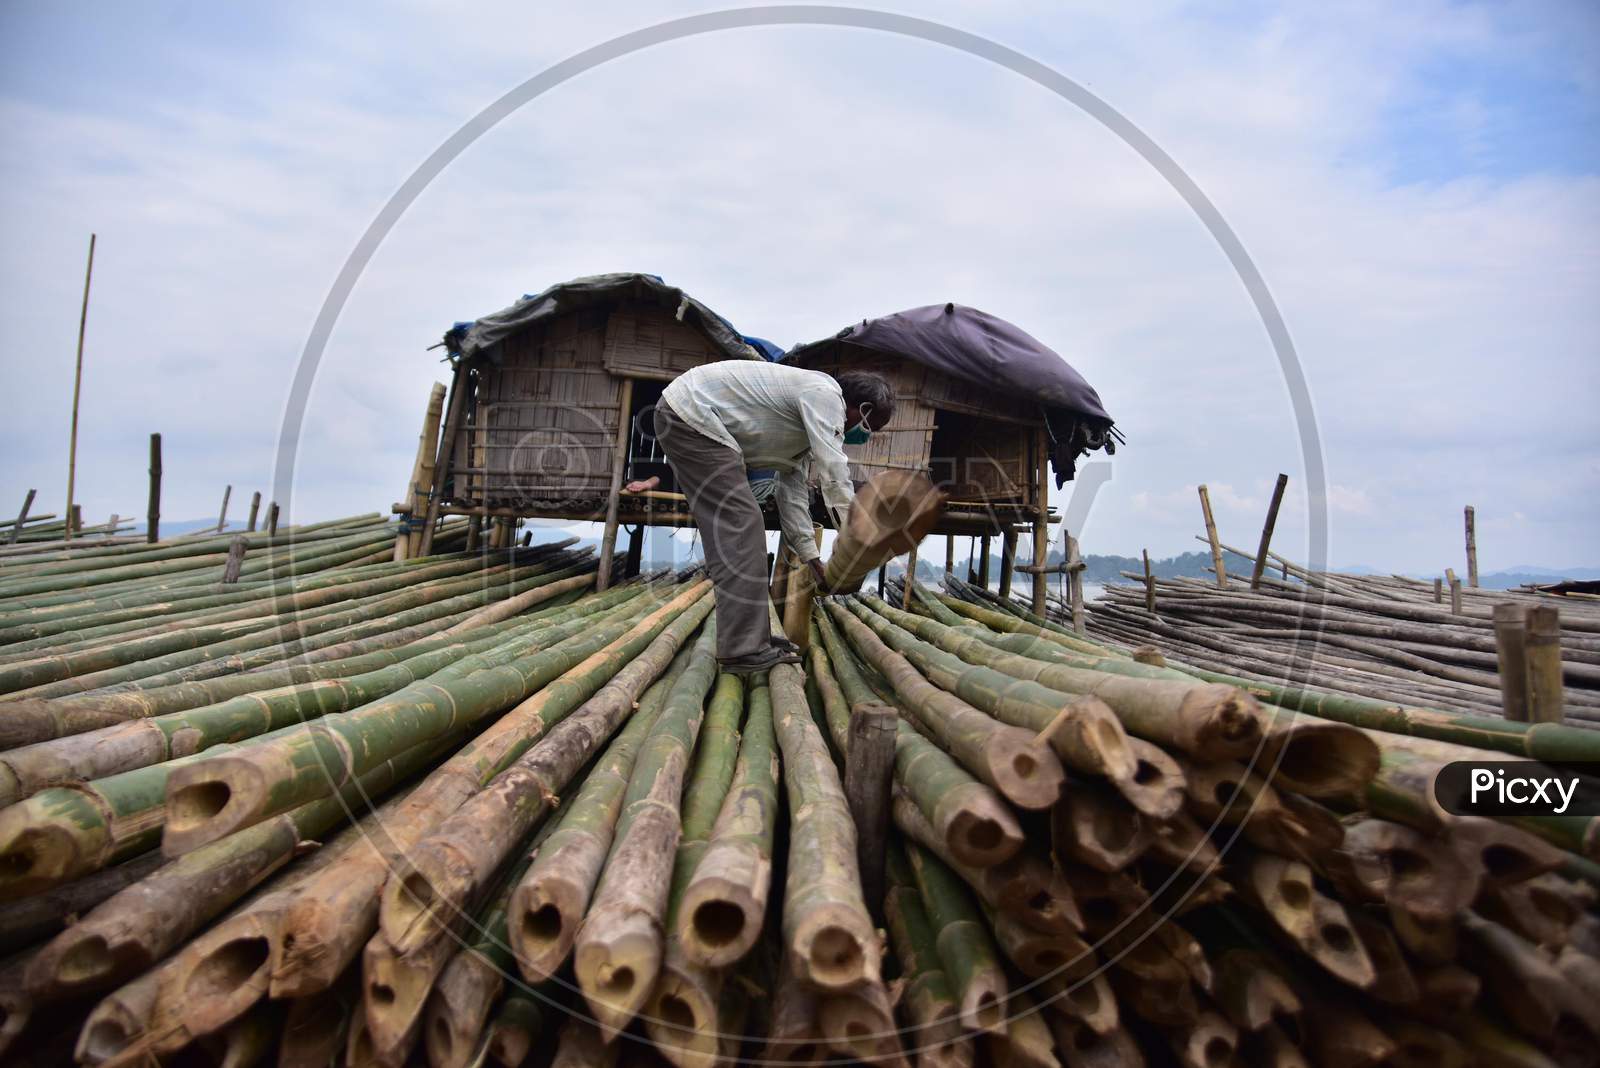 A Worker arranges bamboo at a bamboo market on the banks of the river Brahmaputra in Guwahati  On Oct 22,2020.